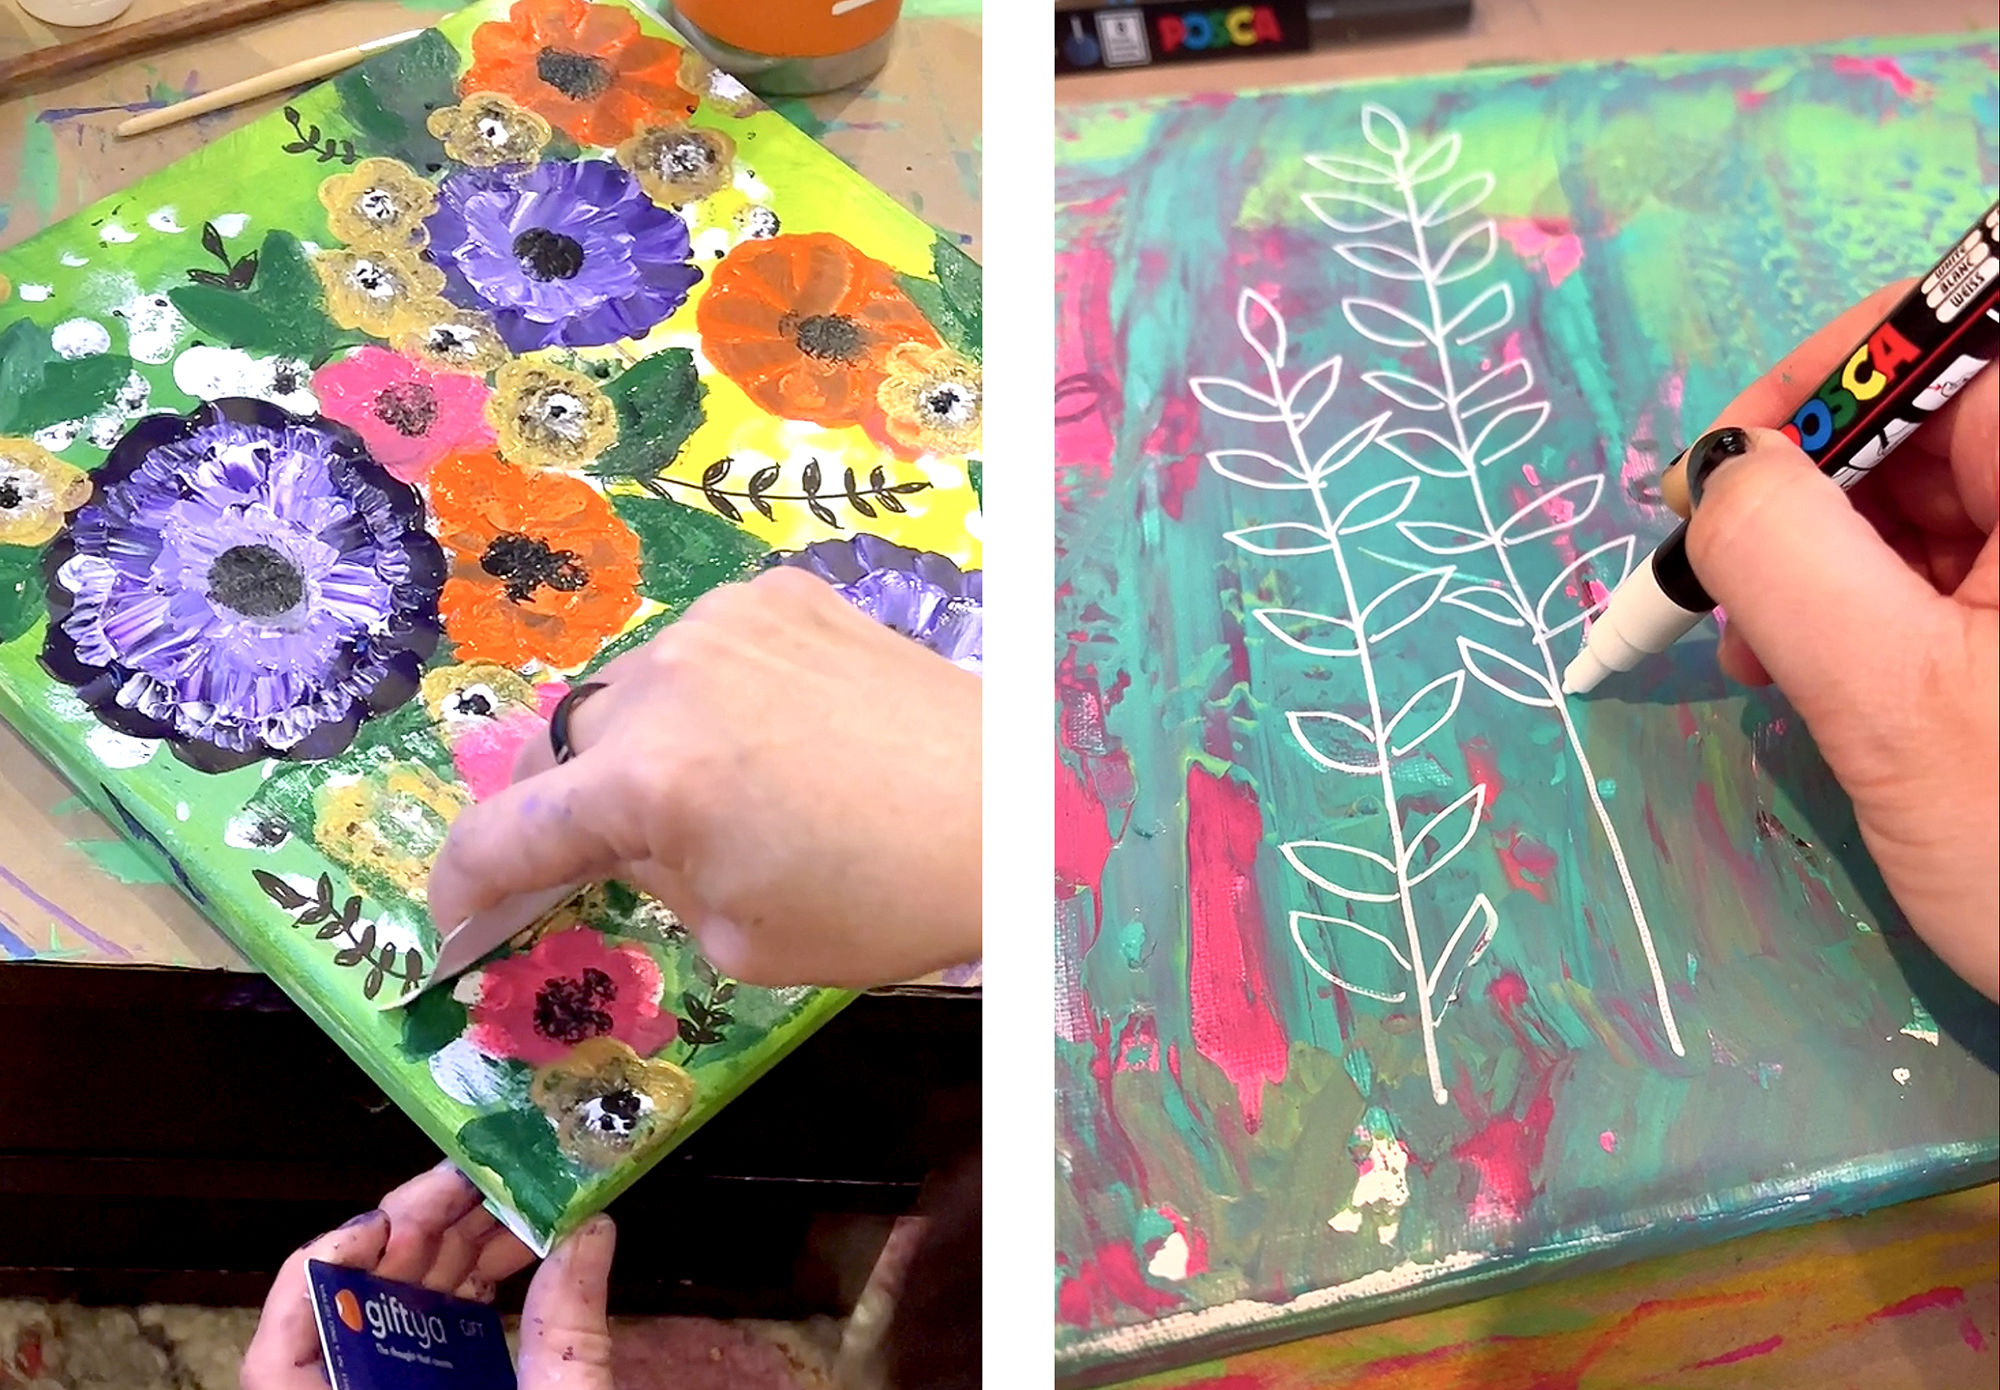 image of 2 photos, on the left shows smearing a wet floral painting with a card, and on the right shows adding white post paint marker to a painting